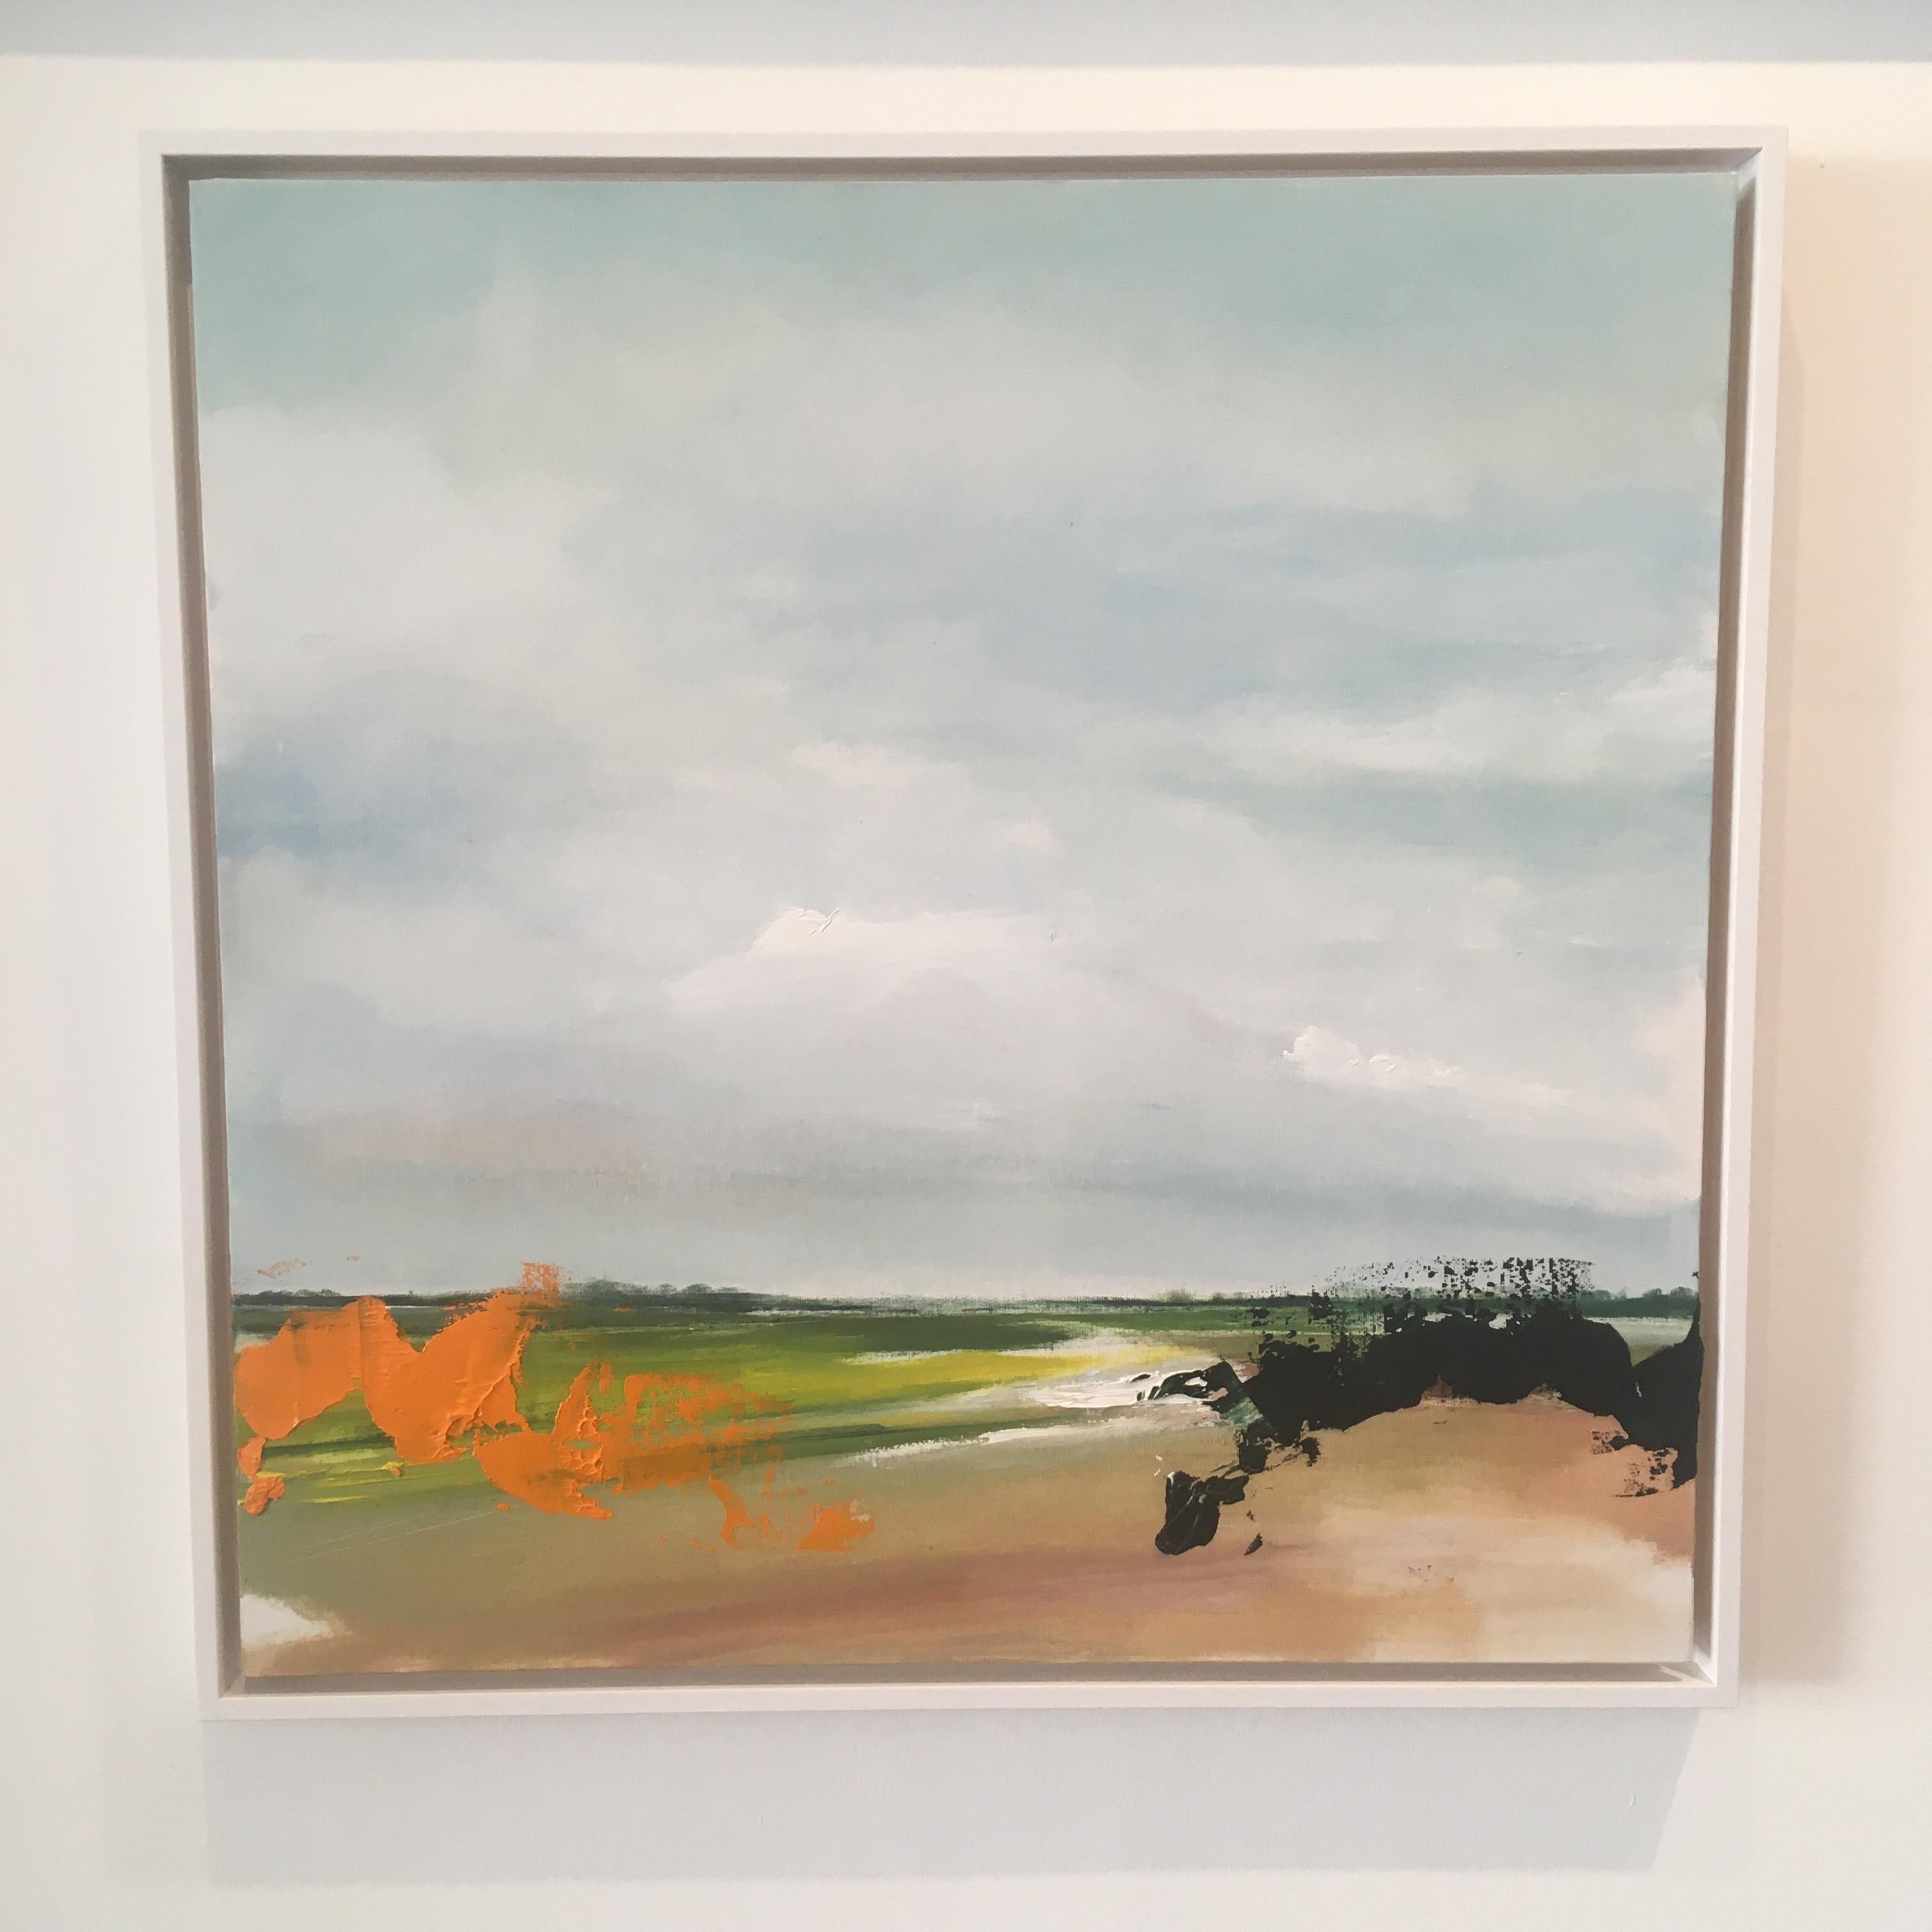 A Kentish Fieldsong - Abstract / Figurative Rural Landscape: Oil on Board - Painting by Adam De Ville